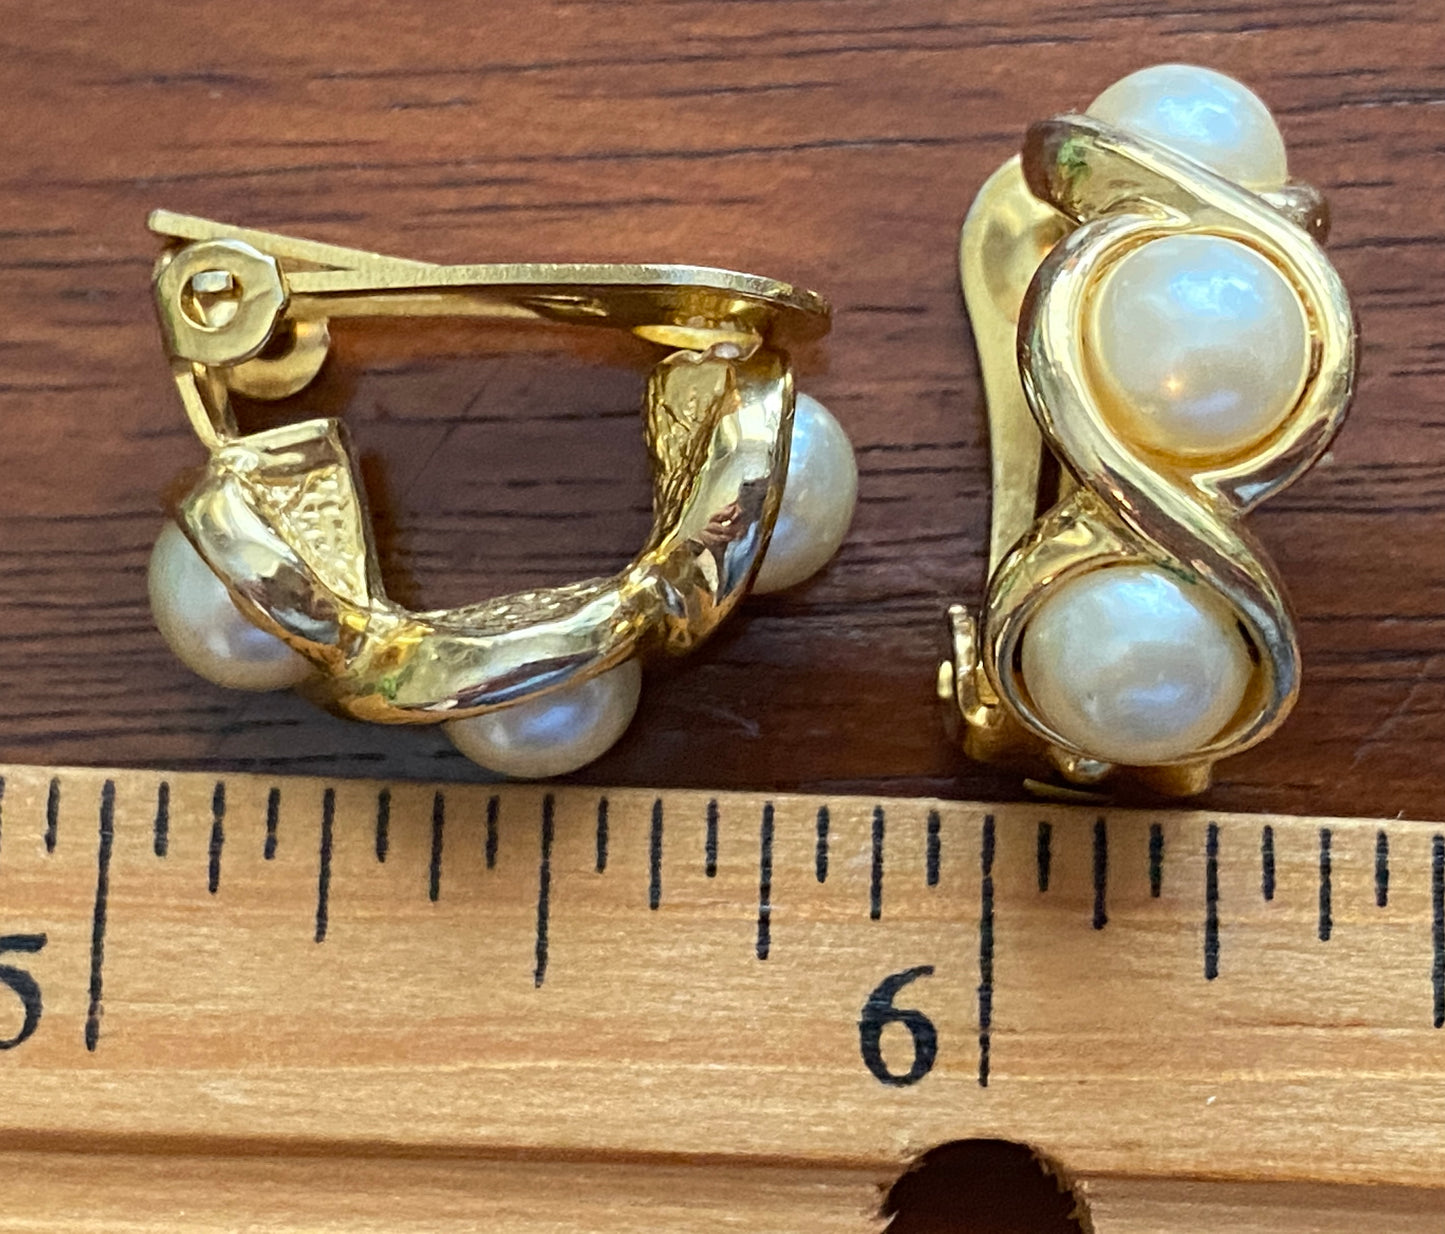 Vintage Gold Tone Metal Faux Pearl Cabochon Clip on Earrings